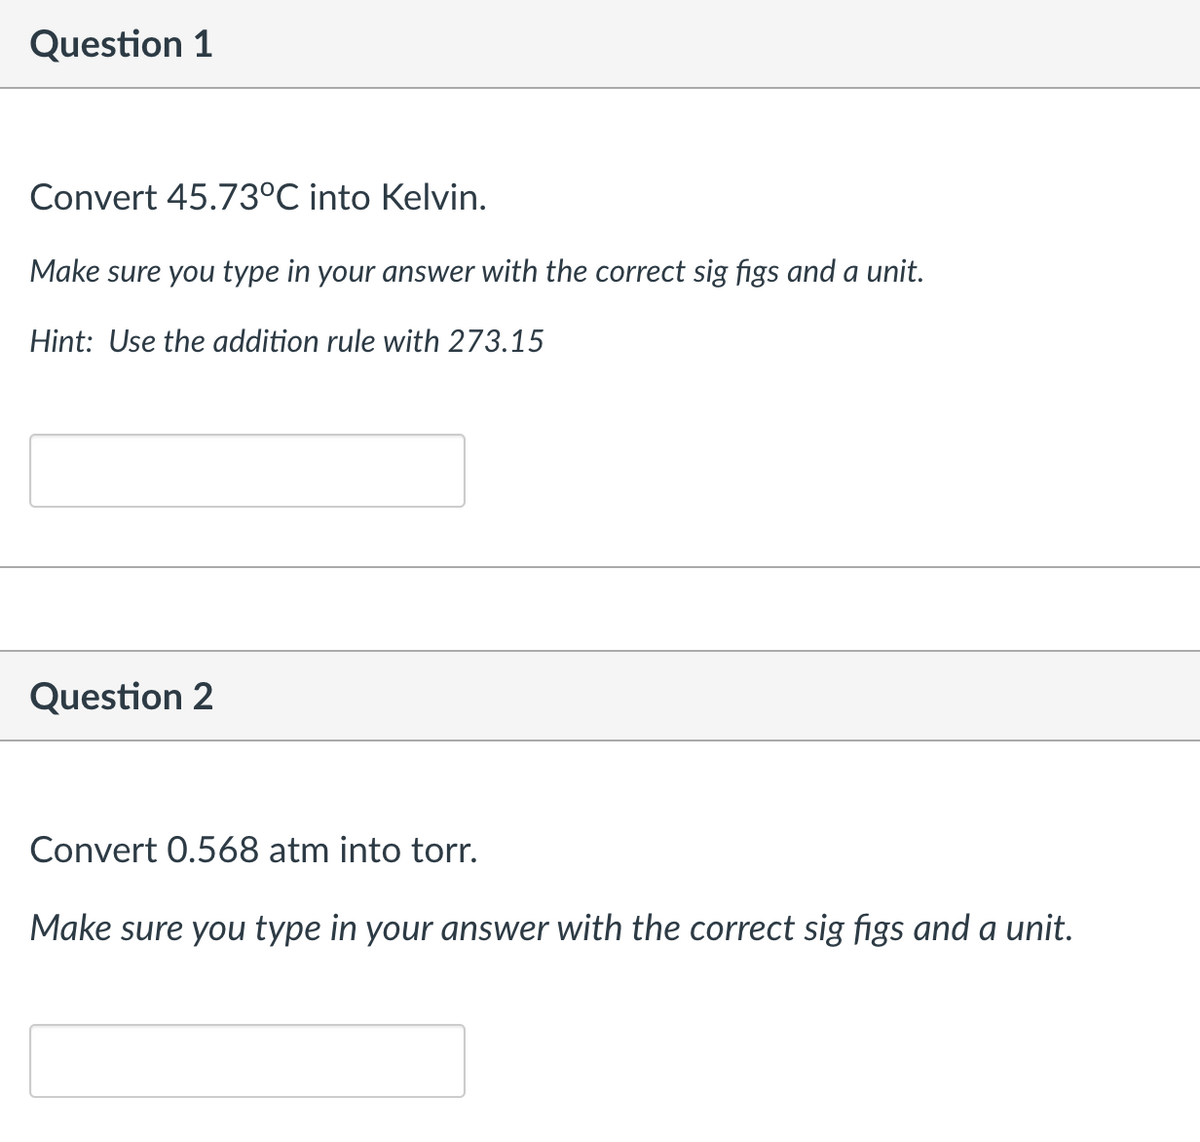 Question 1
Convert 45.73°C into Kelvin.
Make sure you type in your answer with the correct sig figs and a unit.
Hint: Use the addition rule with 273.15
Question 2
Convert 0.568 atm into torr.
Make sure you type in your answer with the correct sig figs and a unit.